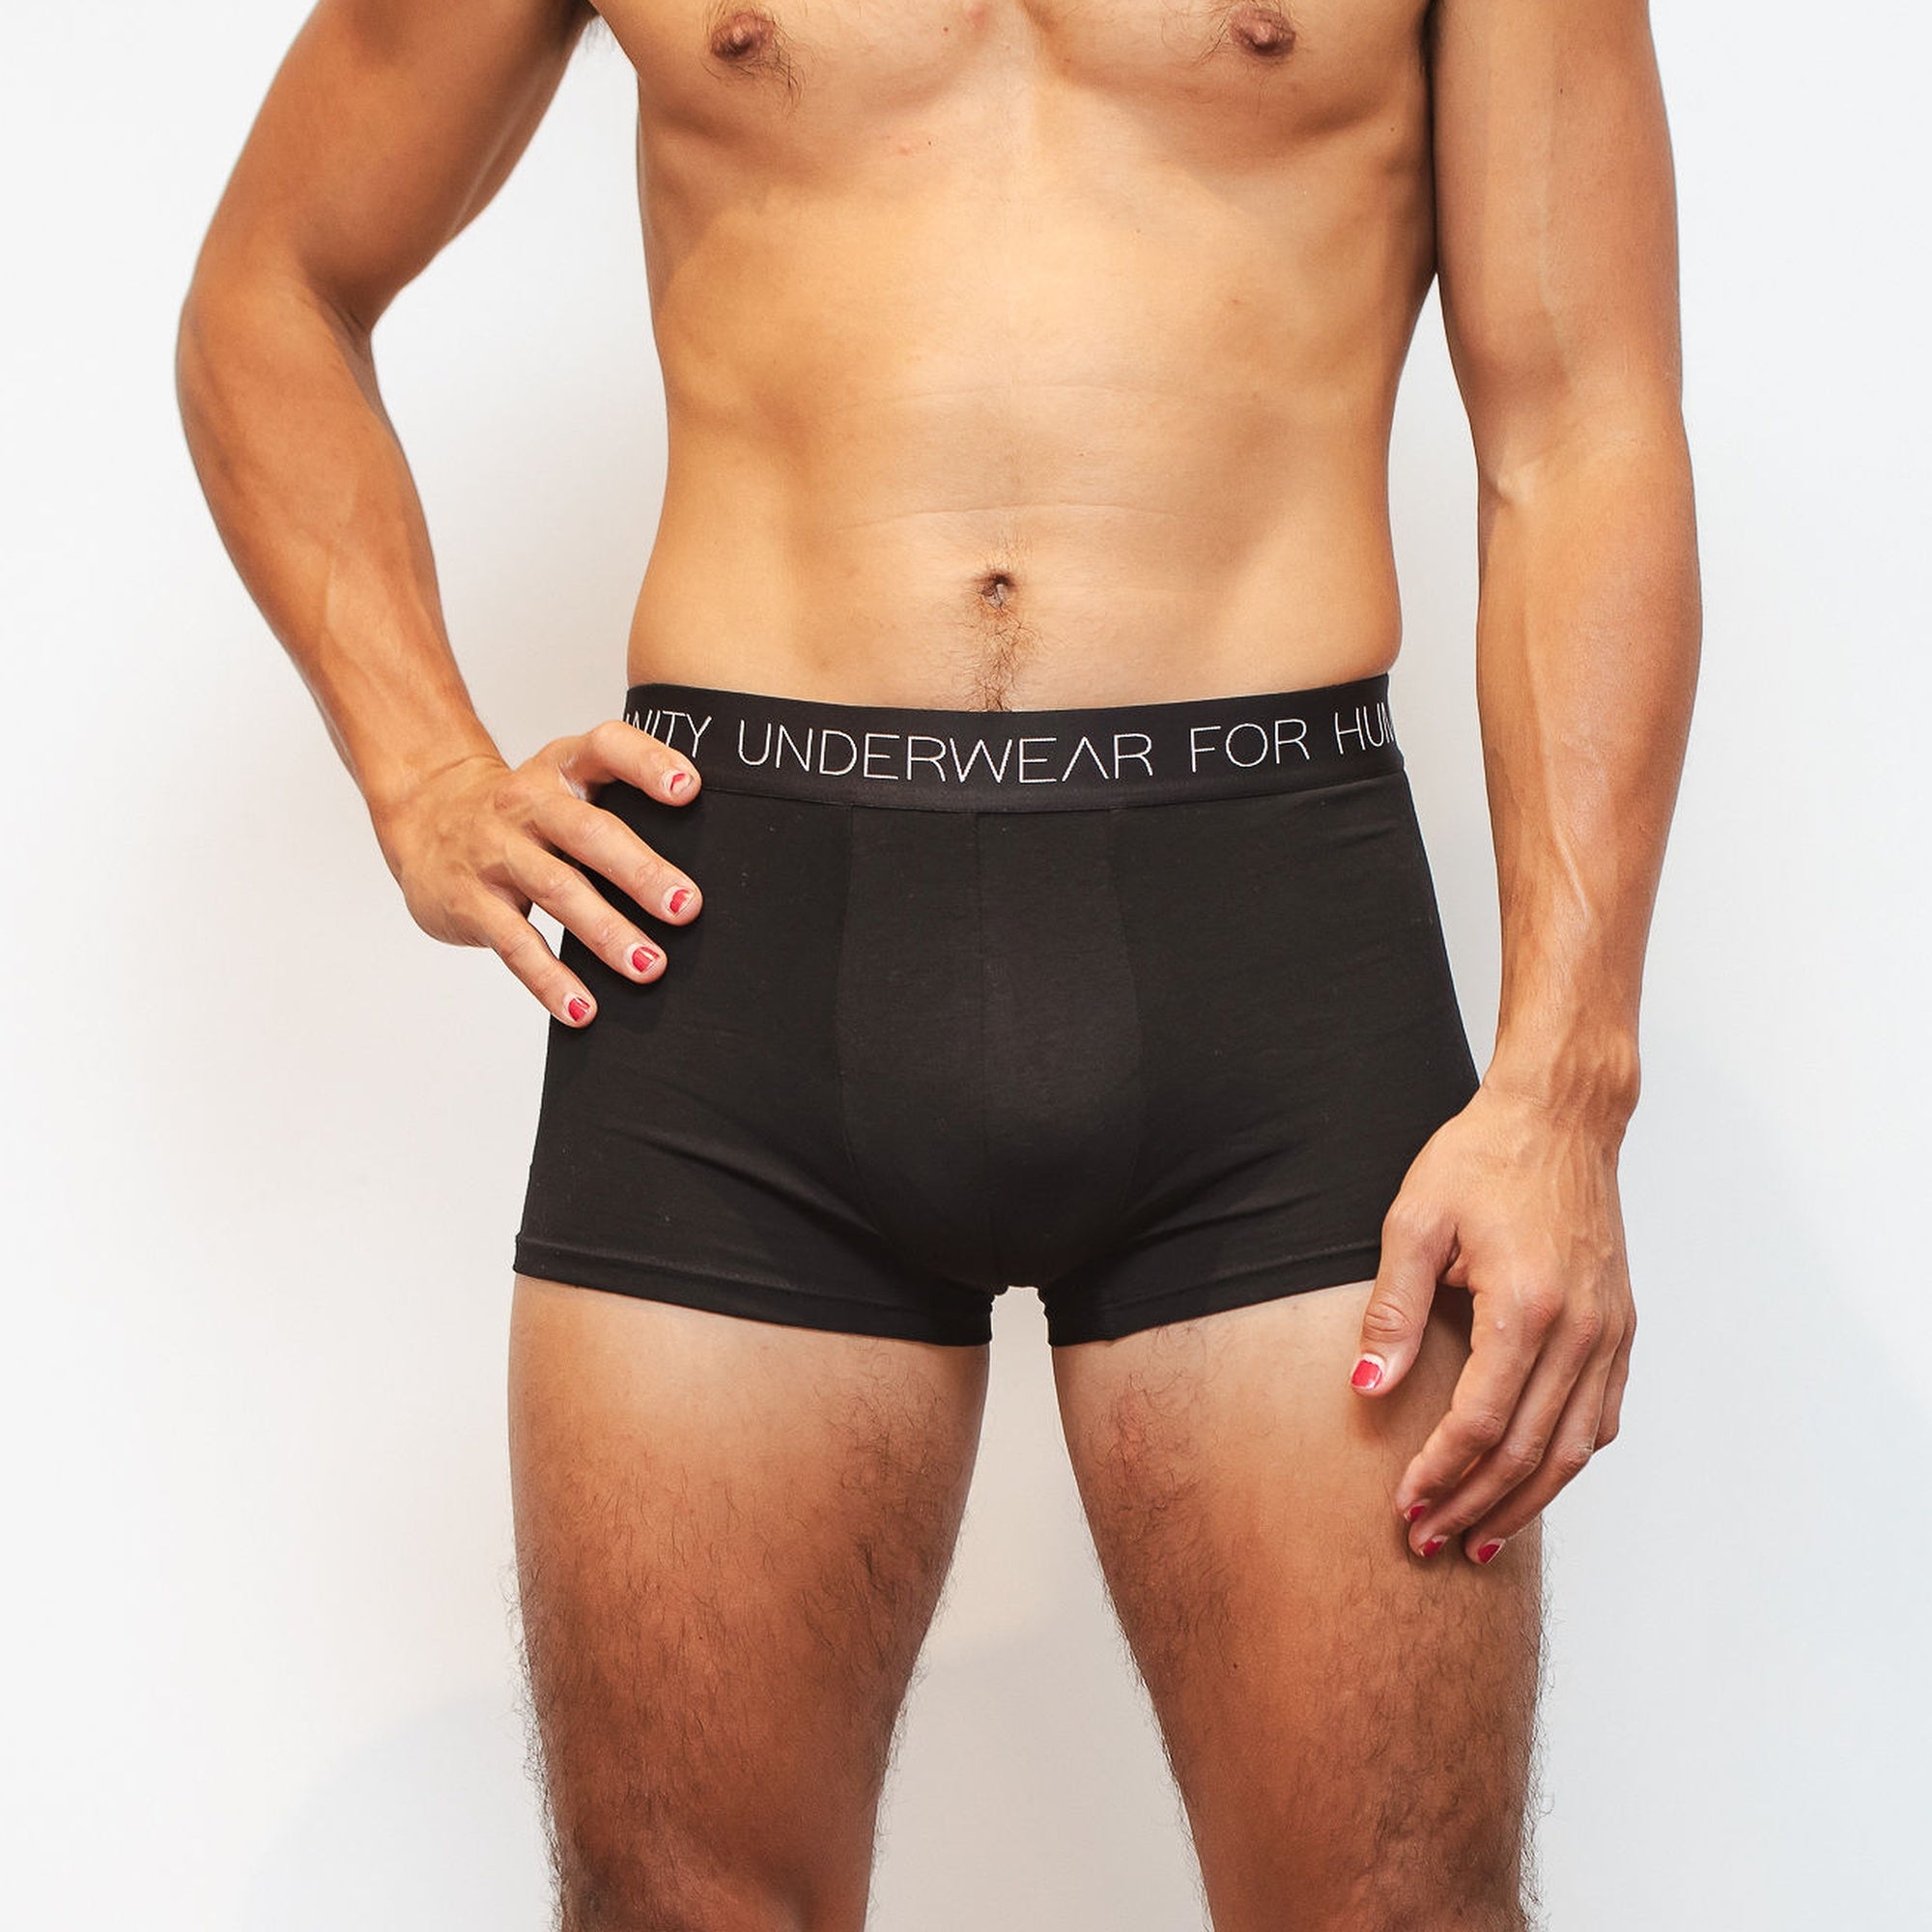 Comfort & softness in this organic underwear with sustainable commitment